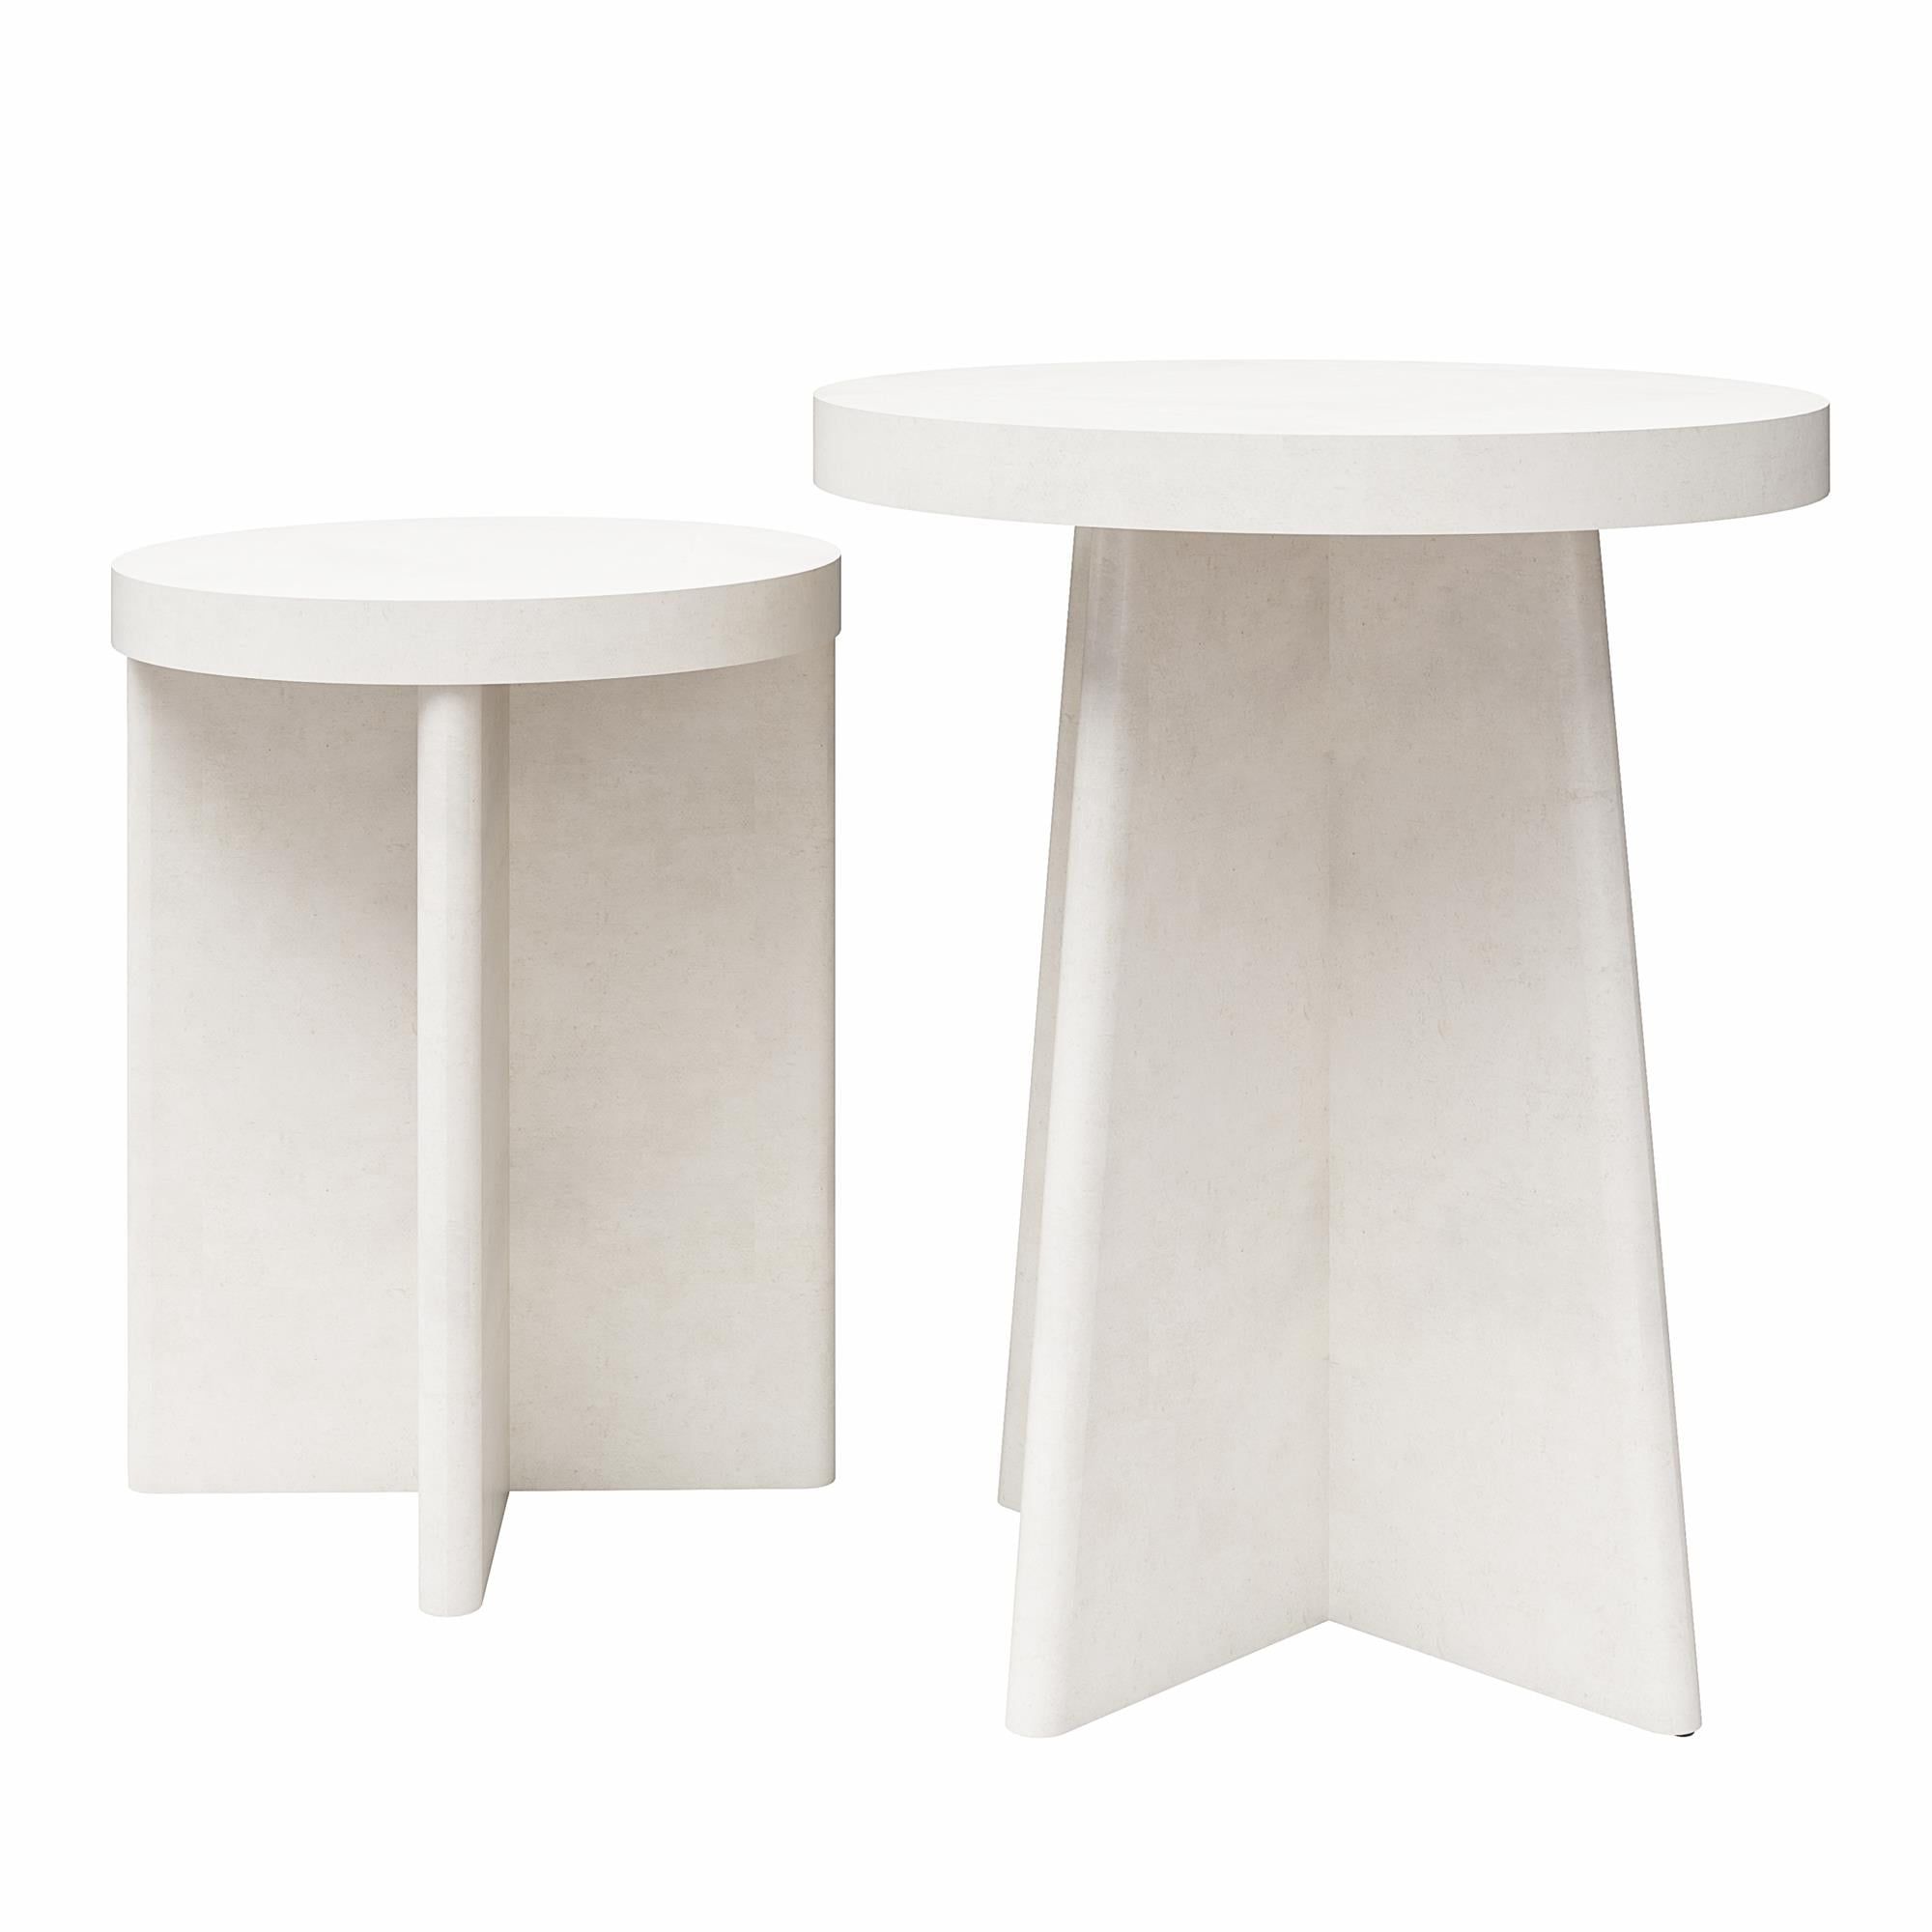 Queer Eye Liam Round End Tables, Set Of 2, Plaster – Walmart Inside Liam Round Plaster Coffee Tables (Gallery 16 of 20)